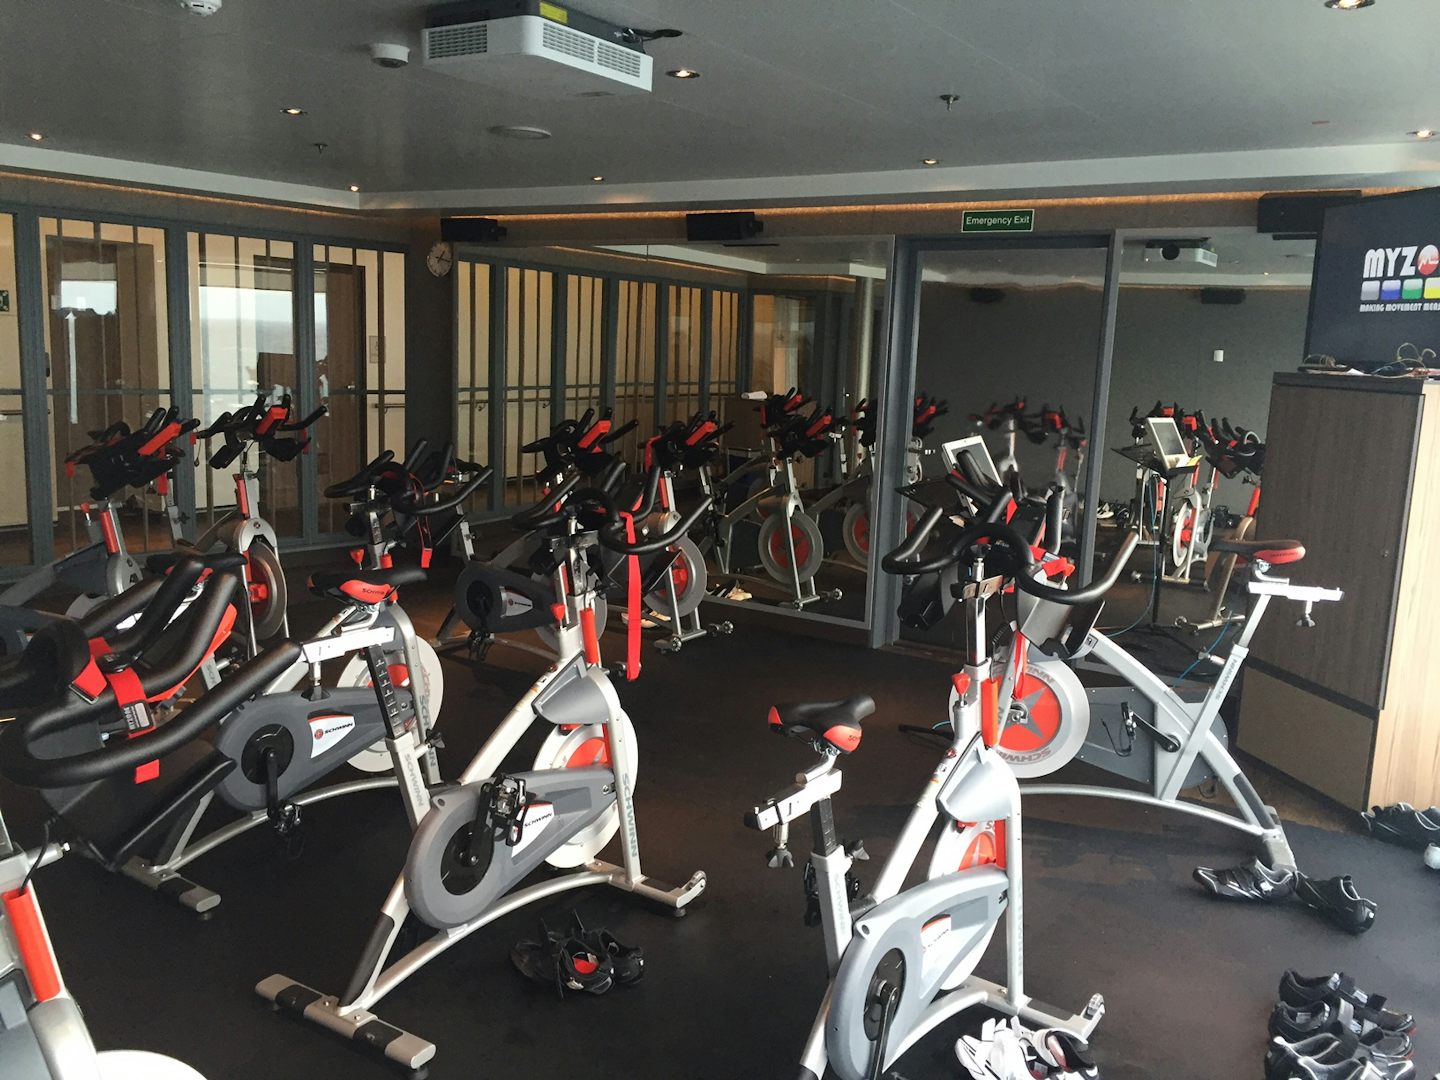 Indoor Cycling room in the fitness center